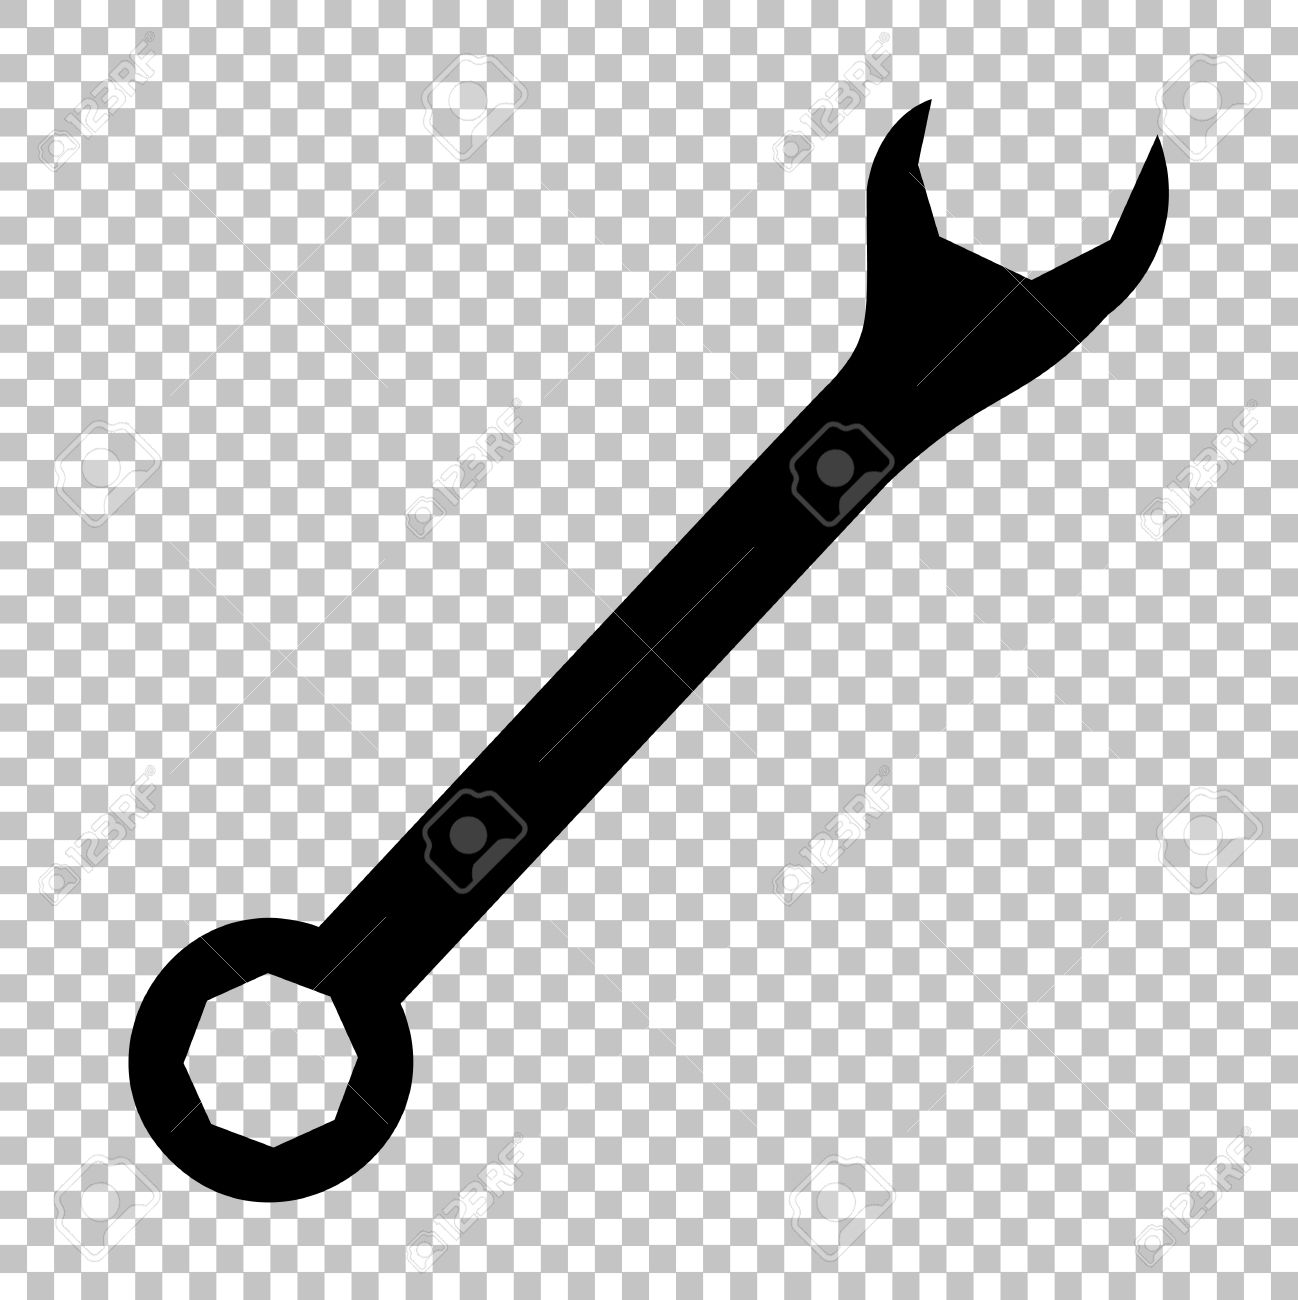 Free Wrench Transparent Background, Download Free Clip Art